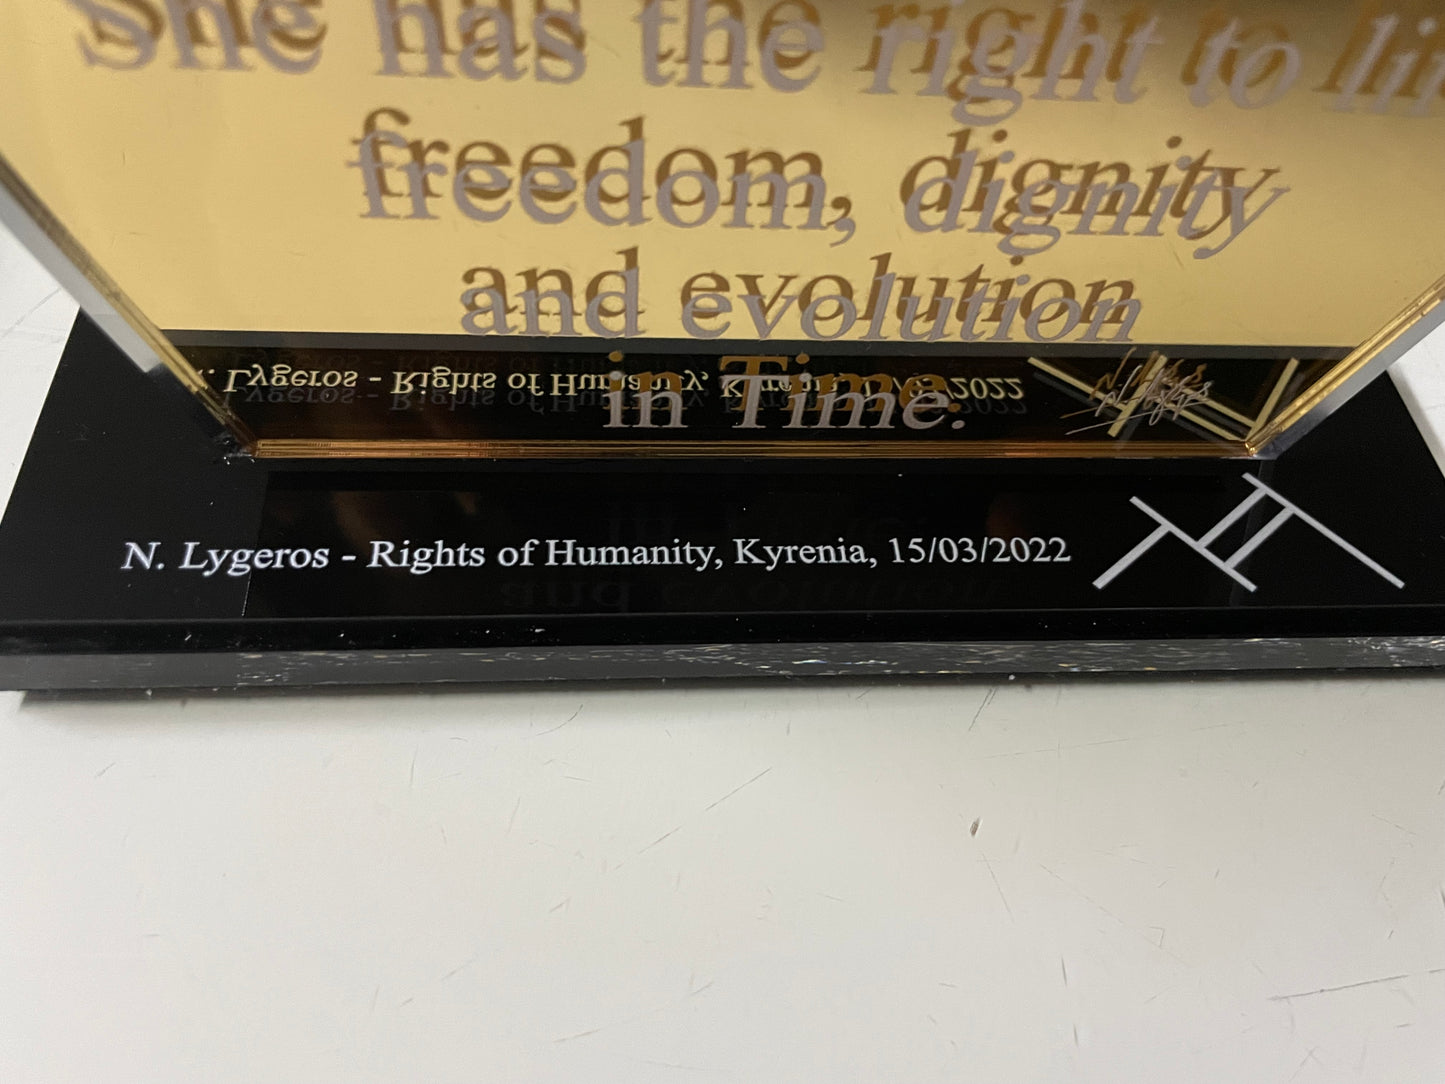 Rights of Humanity